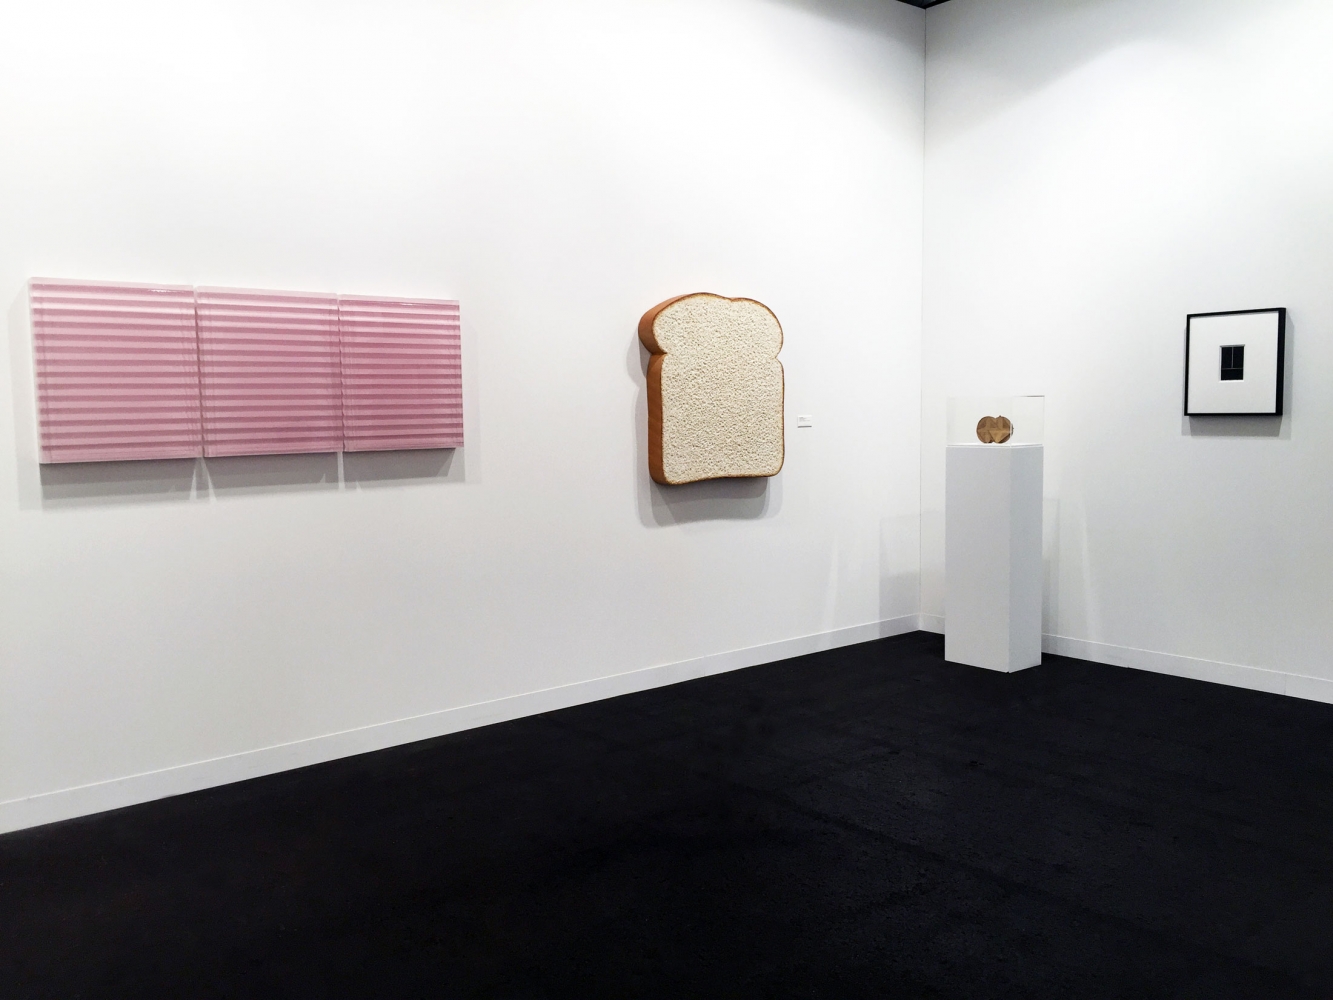 Luhring Augustine, Art Basel, Hall 2.0, Booth A1